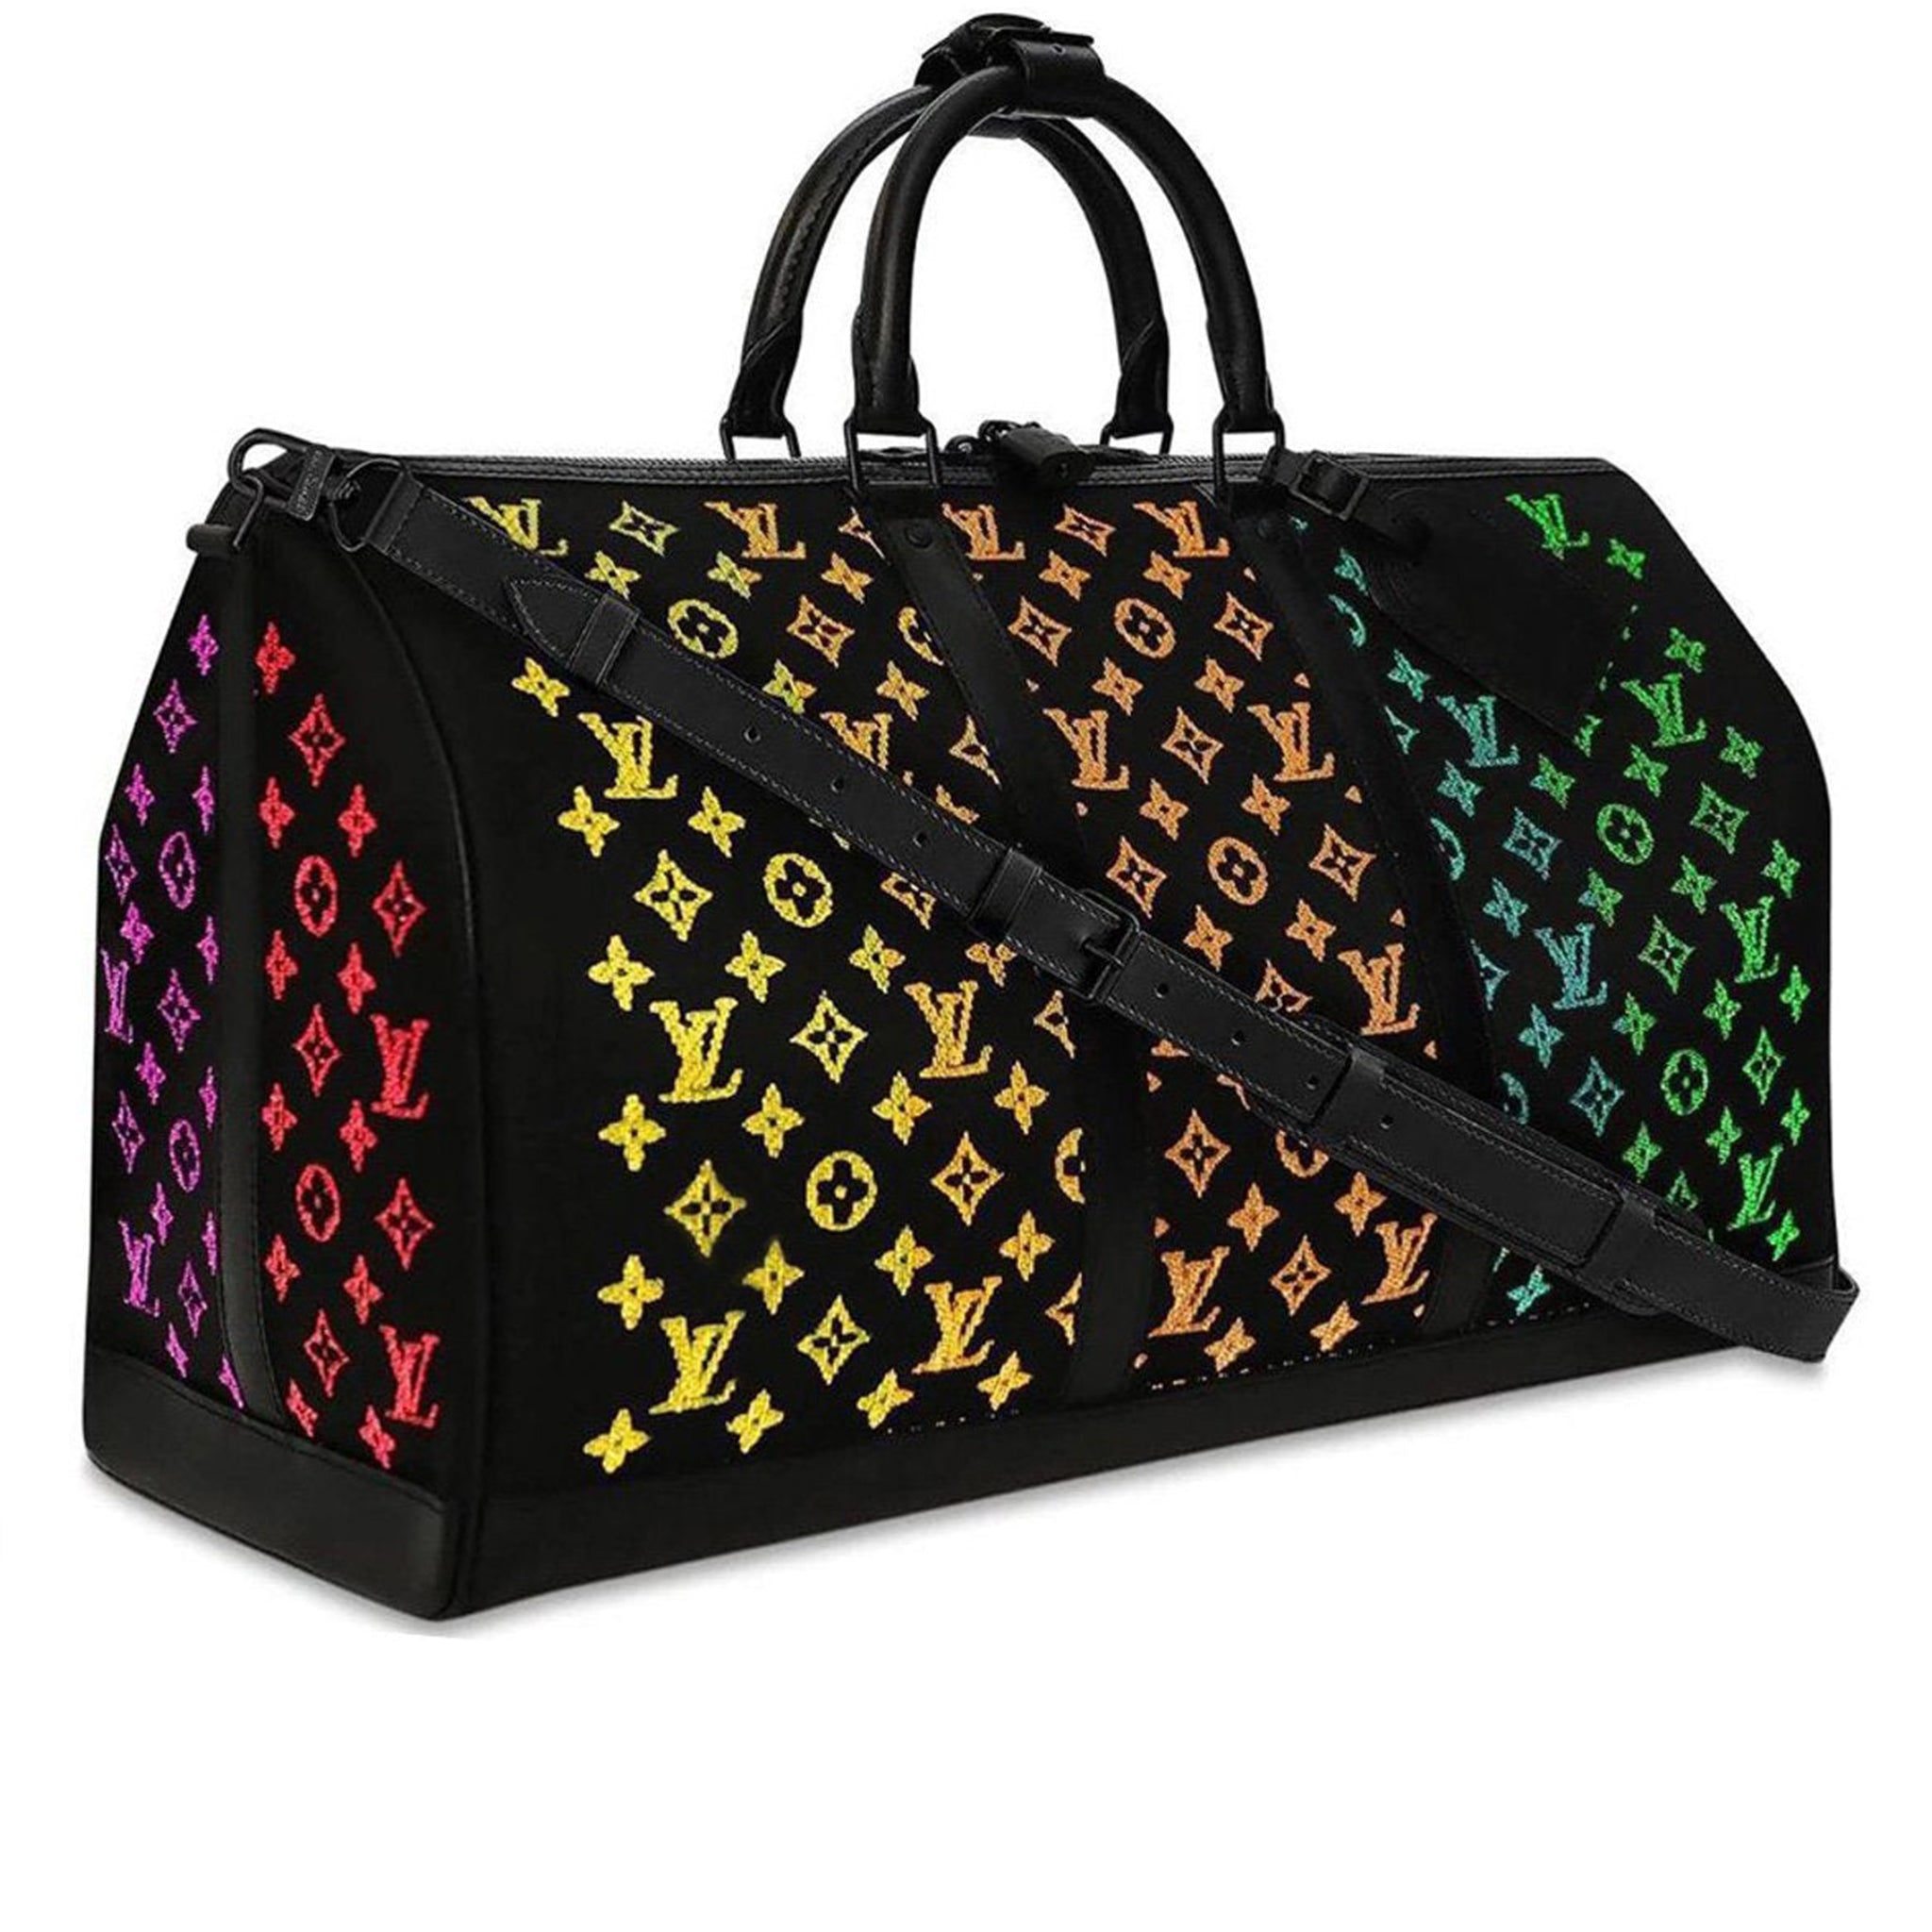 Louis vuitton keepall bag with LED lights 